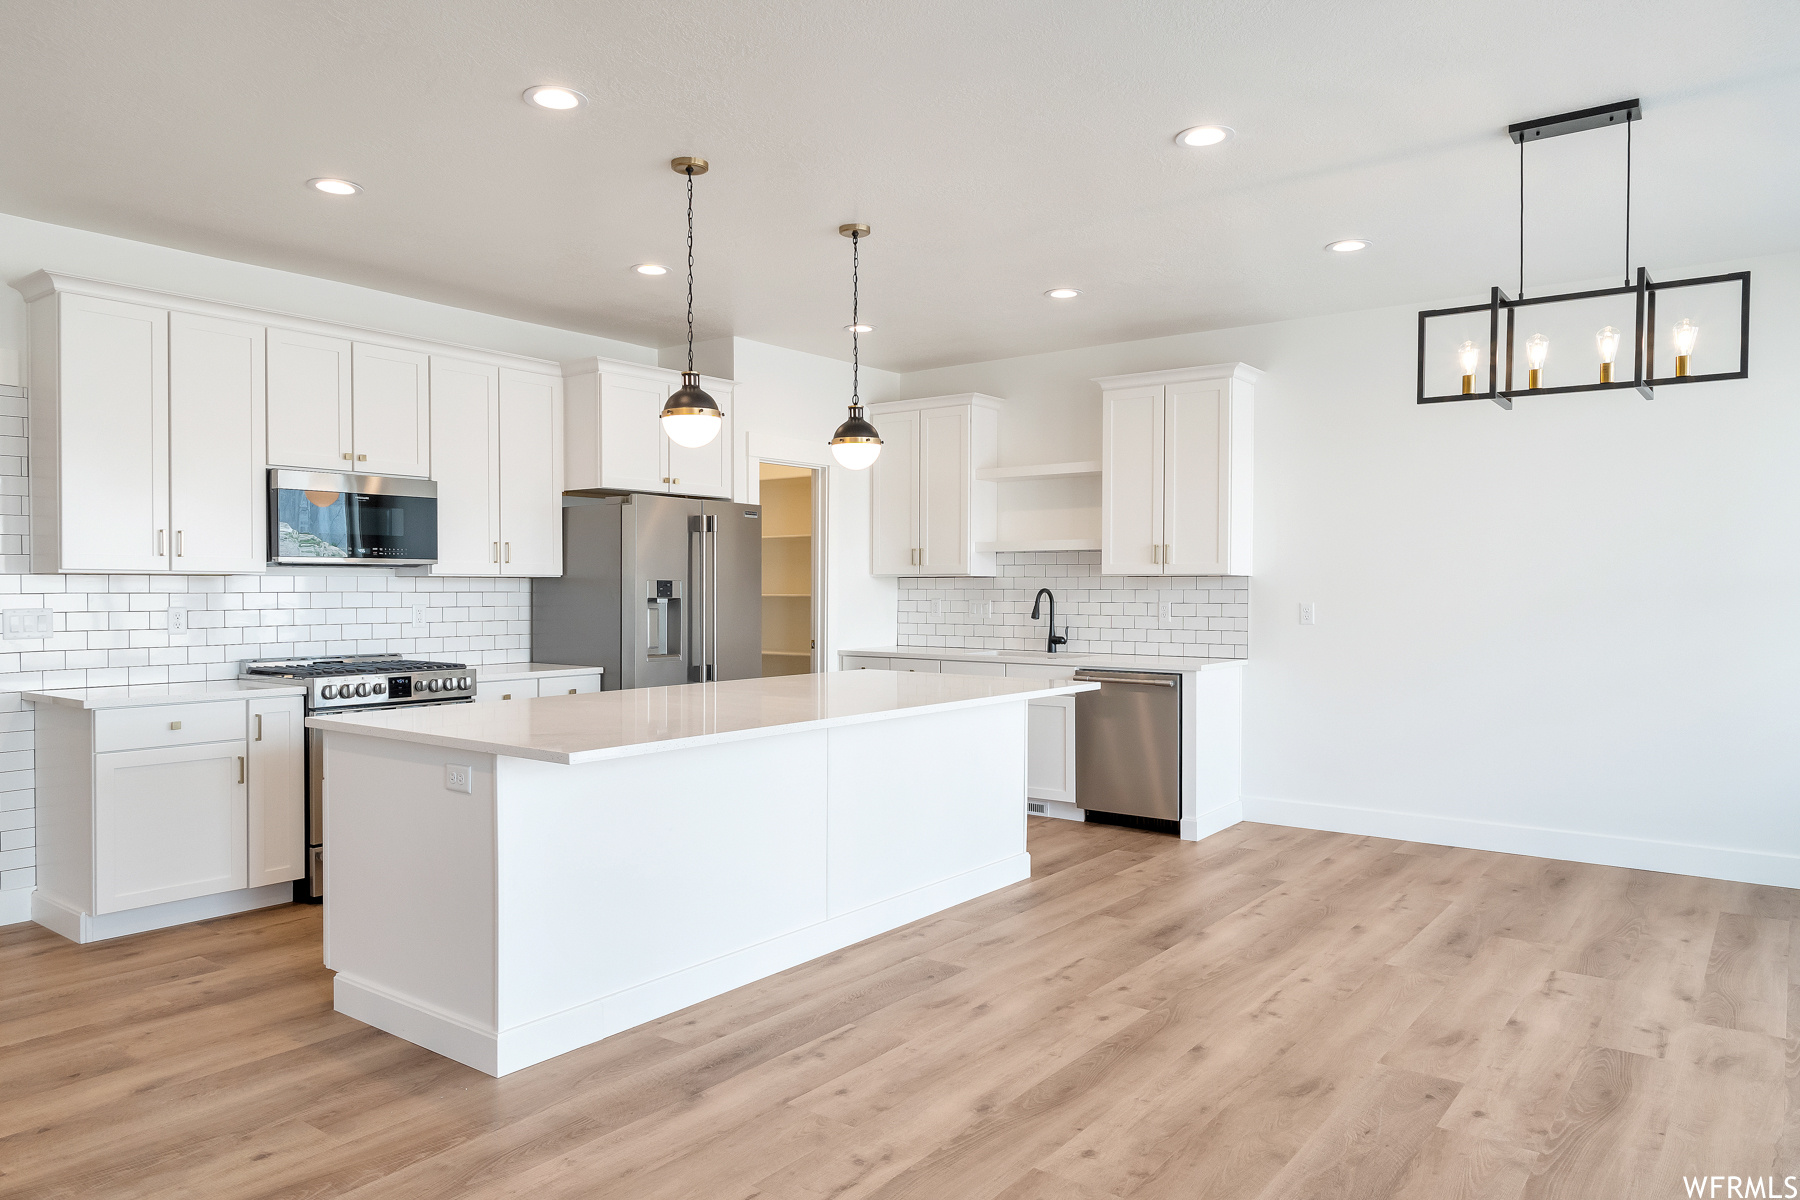 Kitchen featuring a kitchen island, refrigerator, stainless steel dishwasher, gas range oven, microwave, light countertops, light parquet floors, pendant lighting, and white cabinets